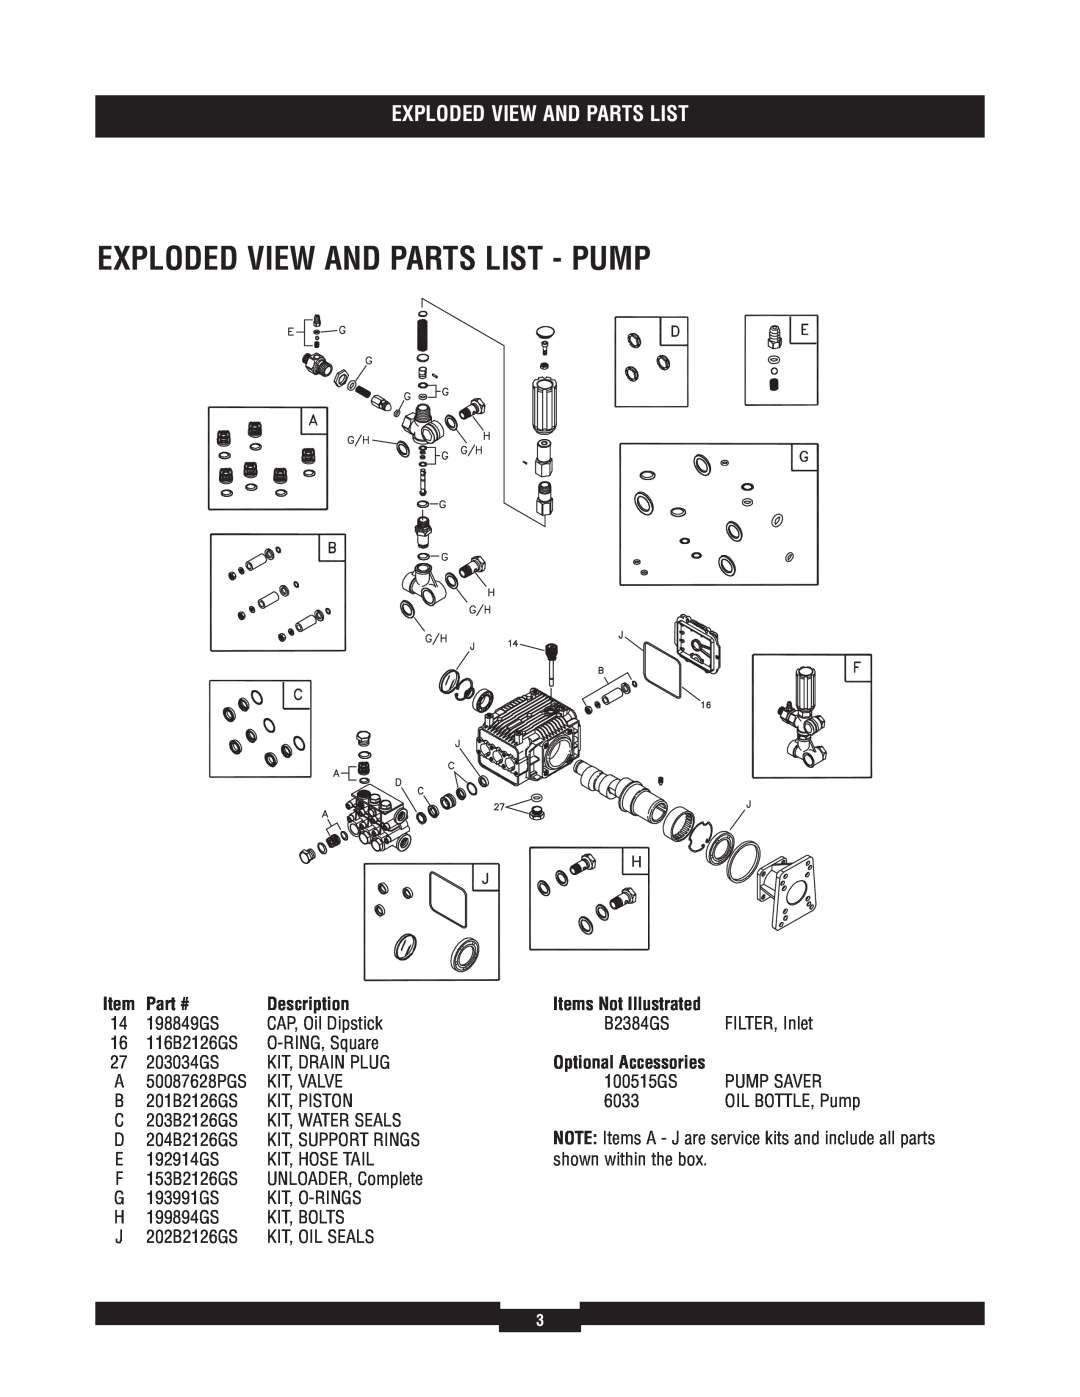 Briggs & Stratton 020225-0 manual Exploded View And Parts List - Pump, Description, Items Not Illustrated 